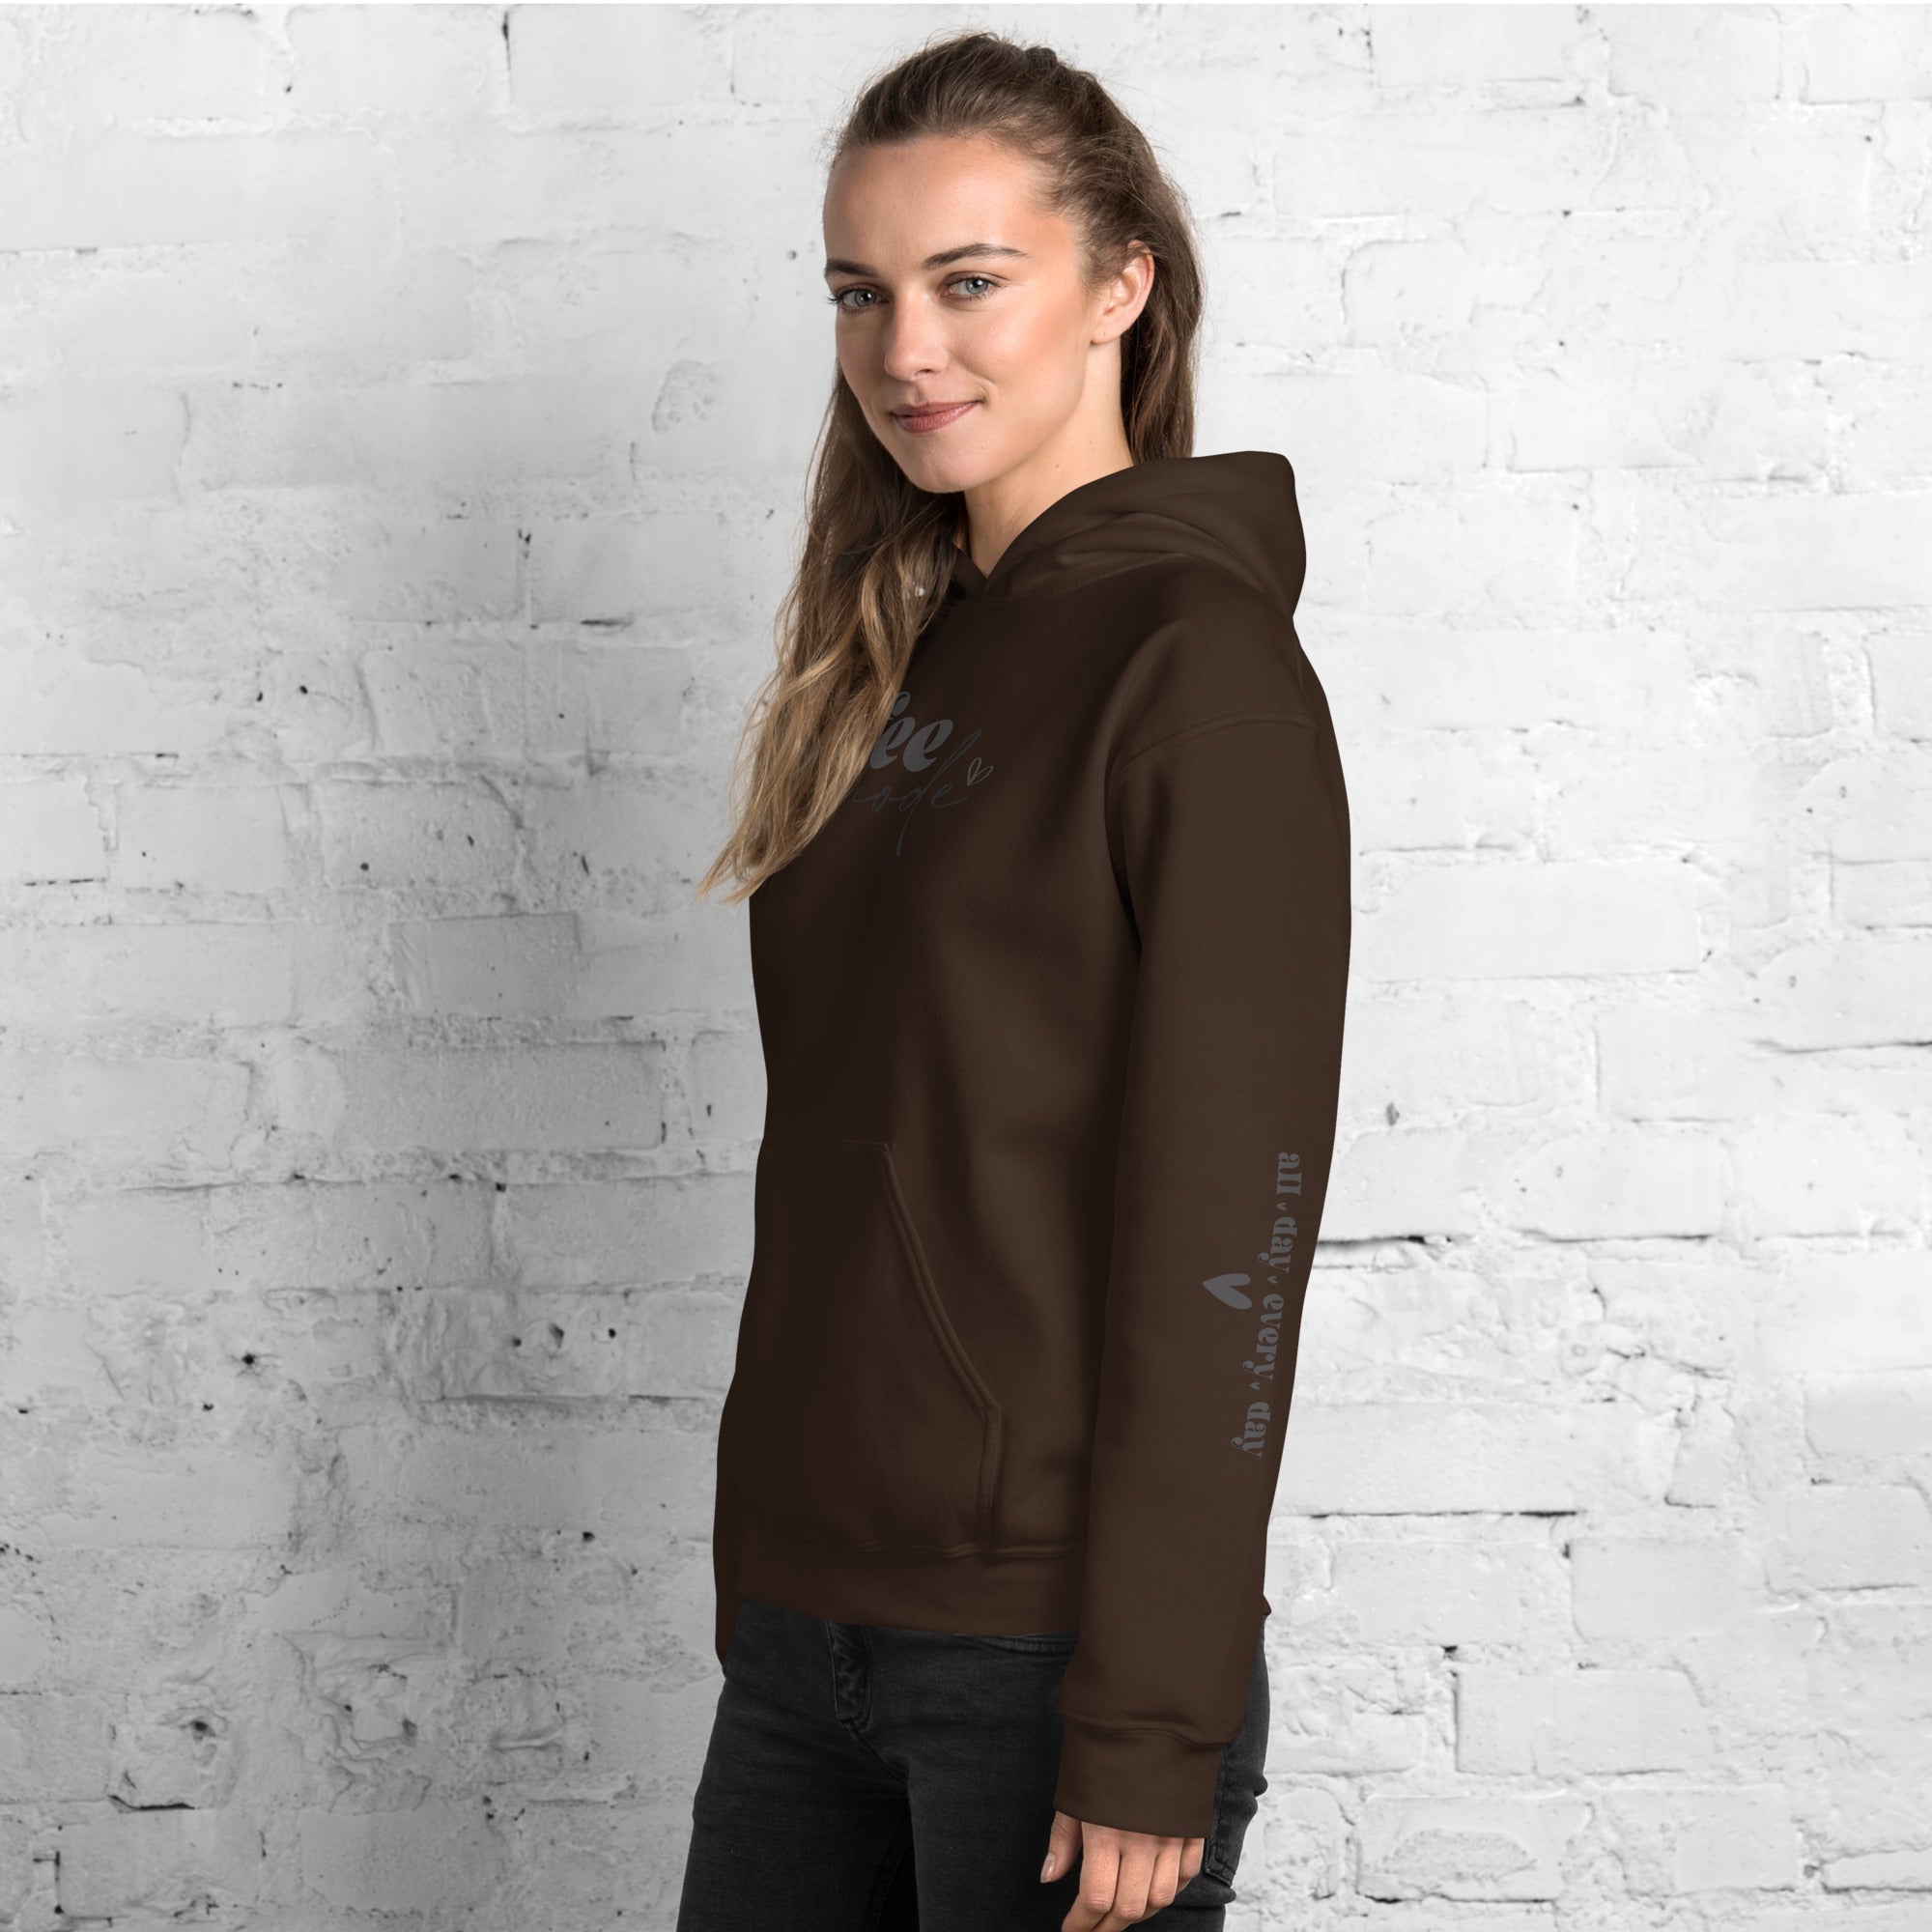 Shop Coffee Mode All Day Every Day Graphic Statement Unisex Hoodie , Hoodies, USA Boutique